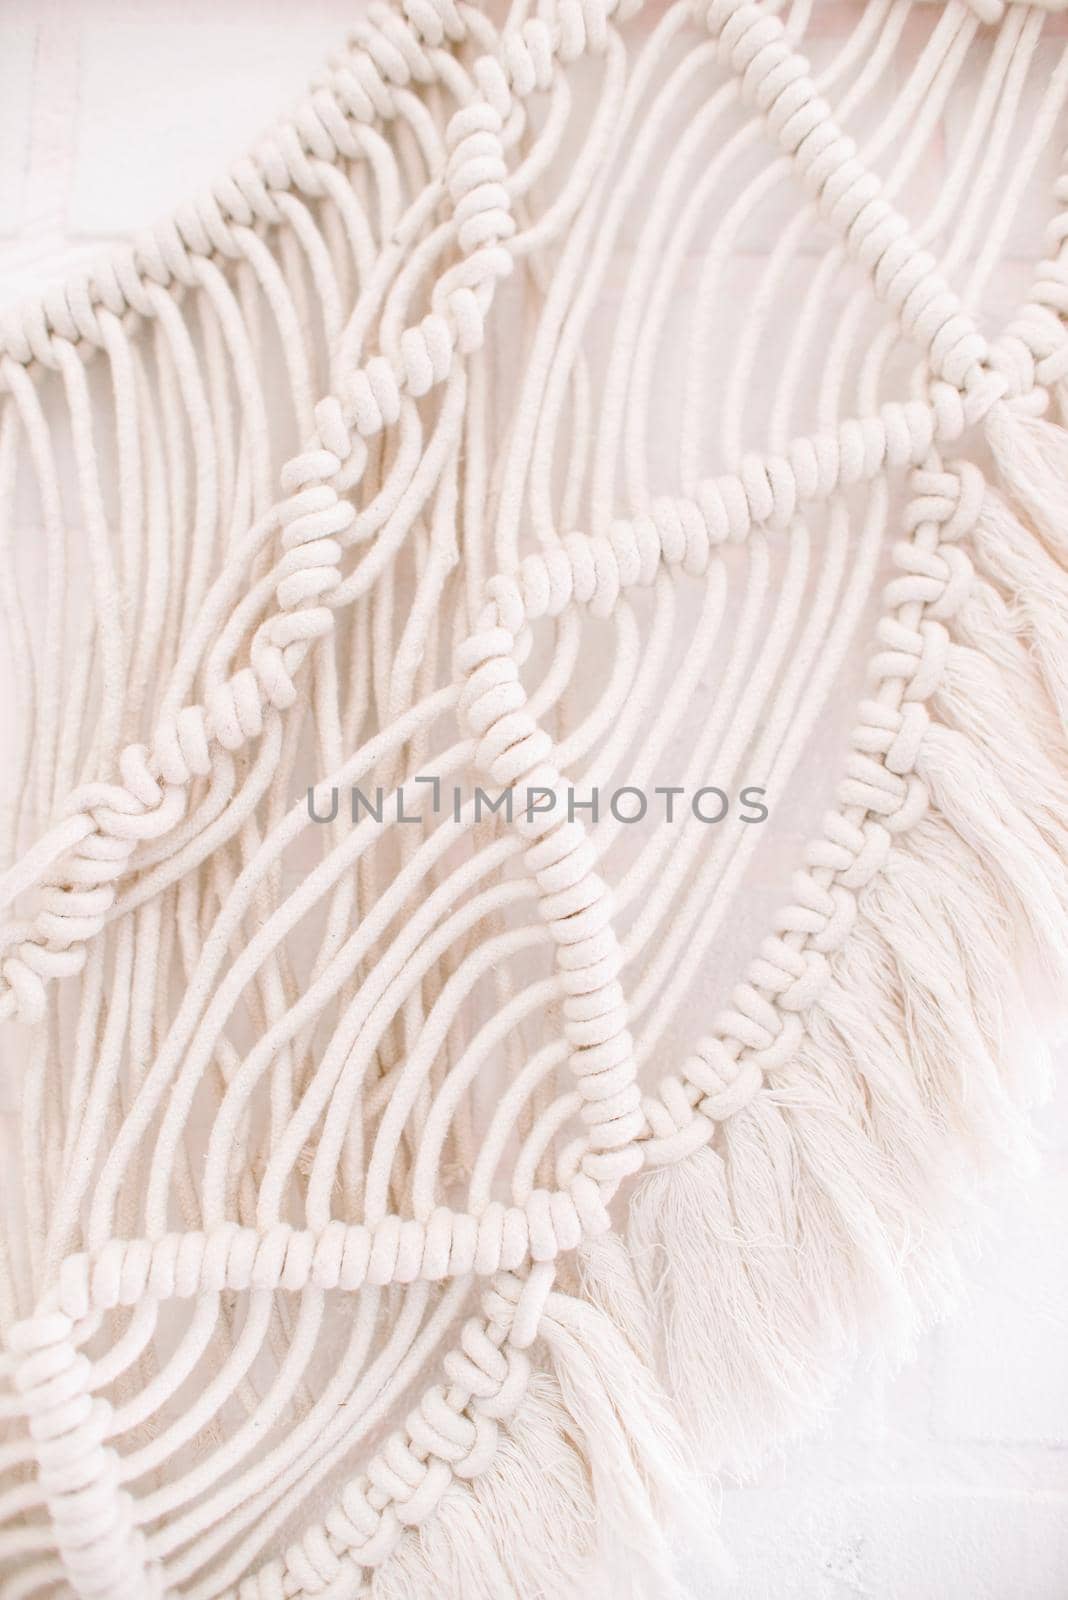 handmade macrame pattern a fragment of a wall panel in the boho style of beige cotton threads of natural color using the technique for home and wedding decor